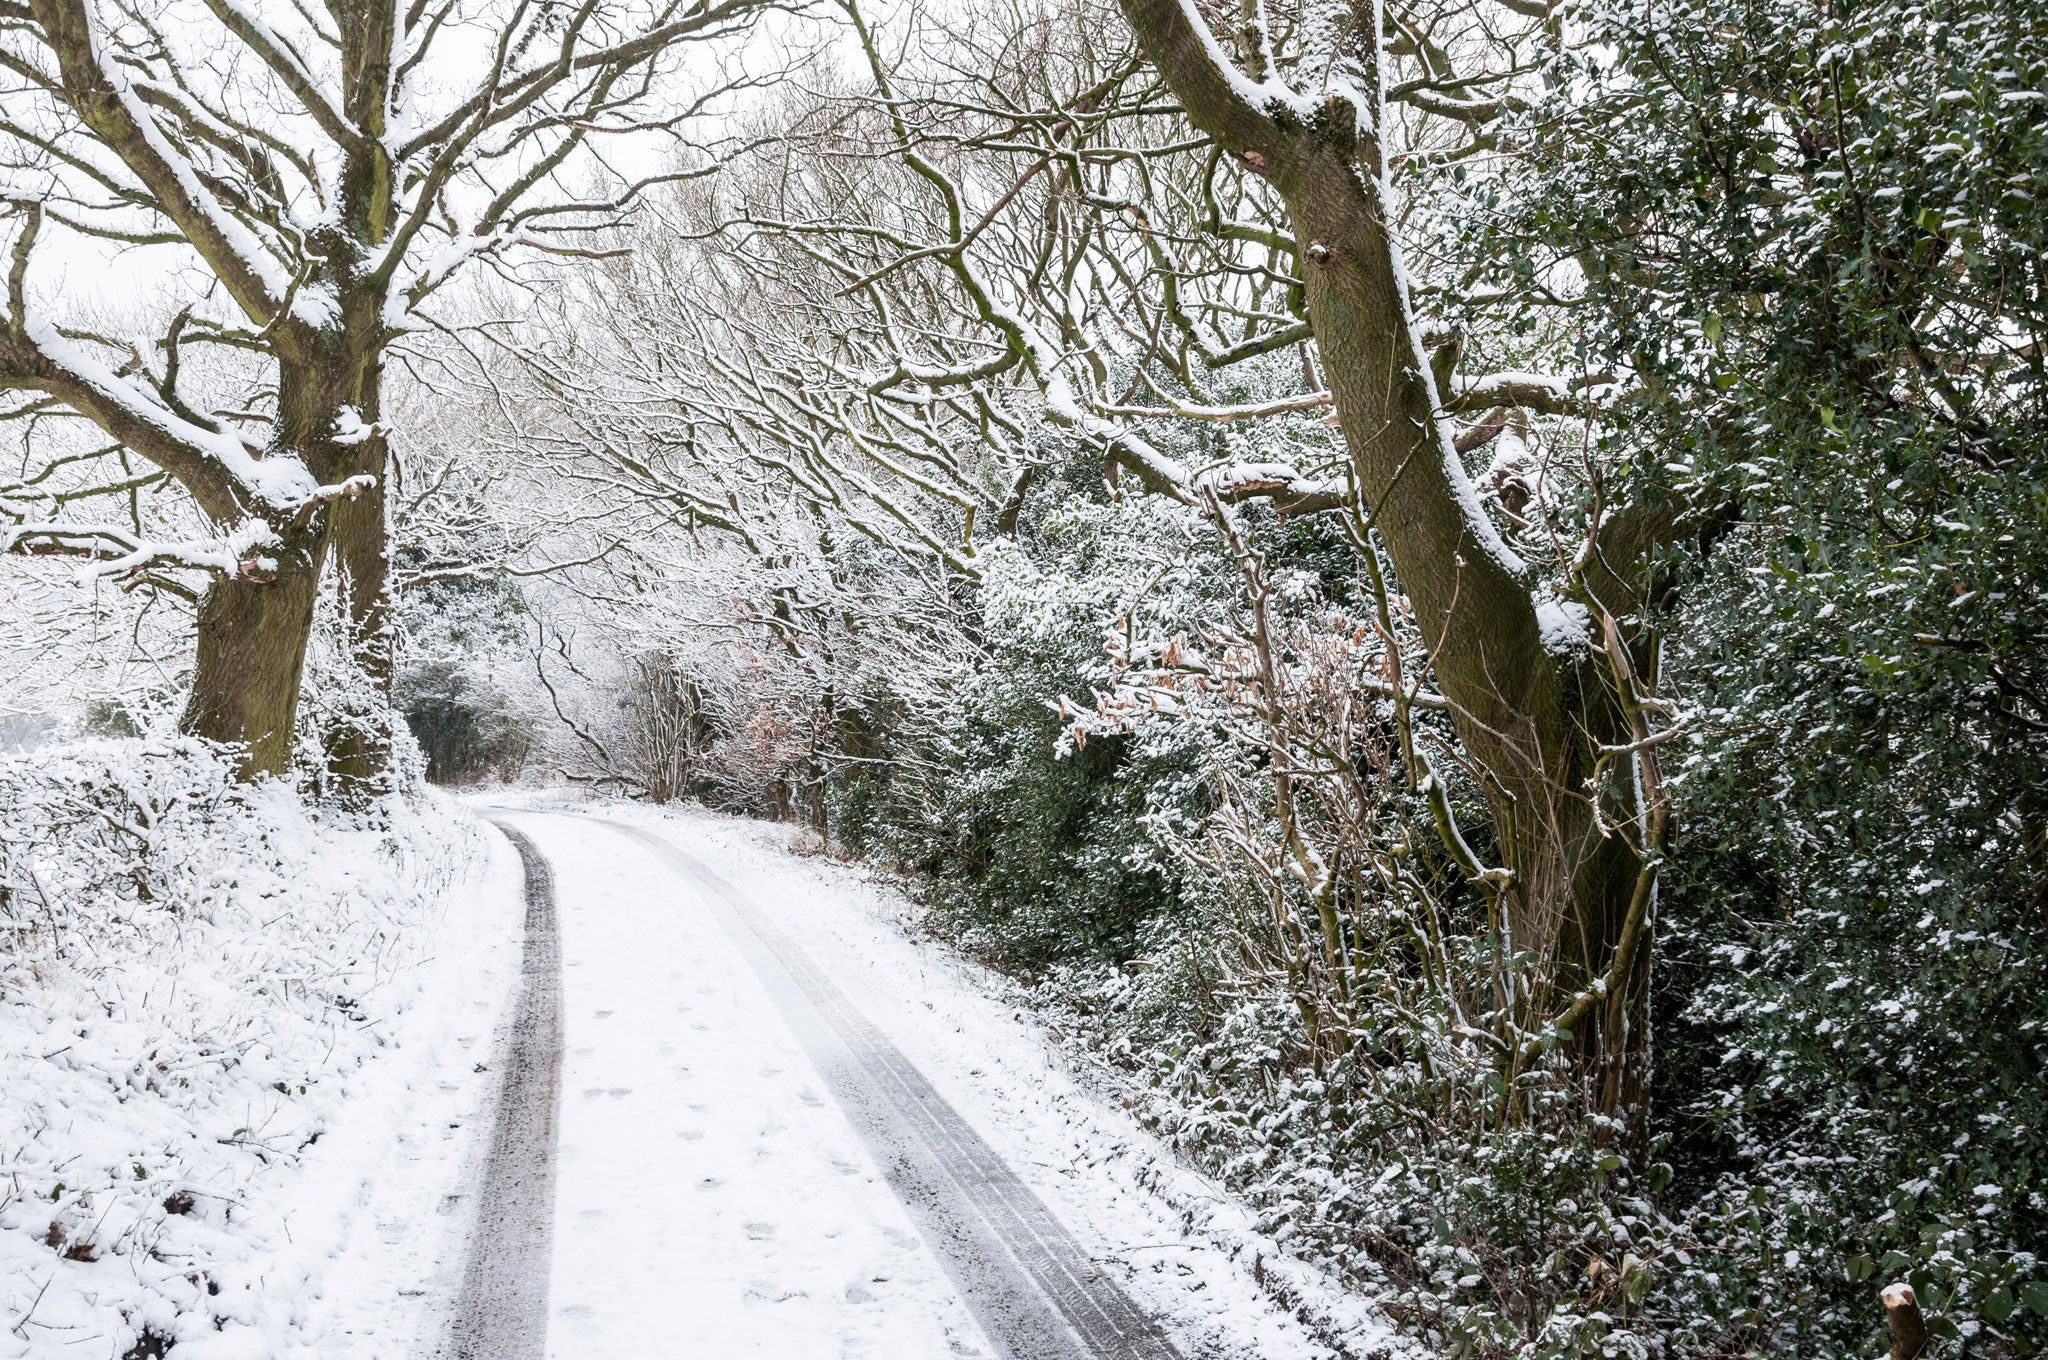 A snow-covered English country lane lined with oak and holly trees